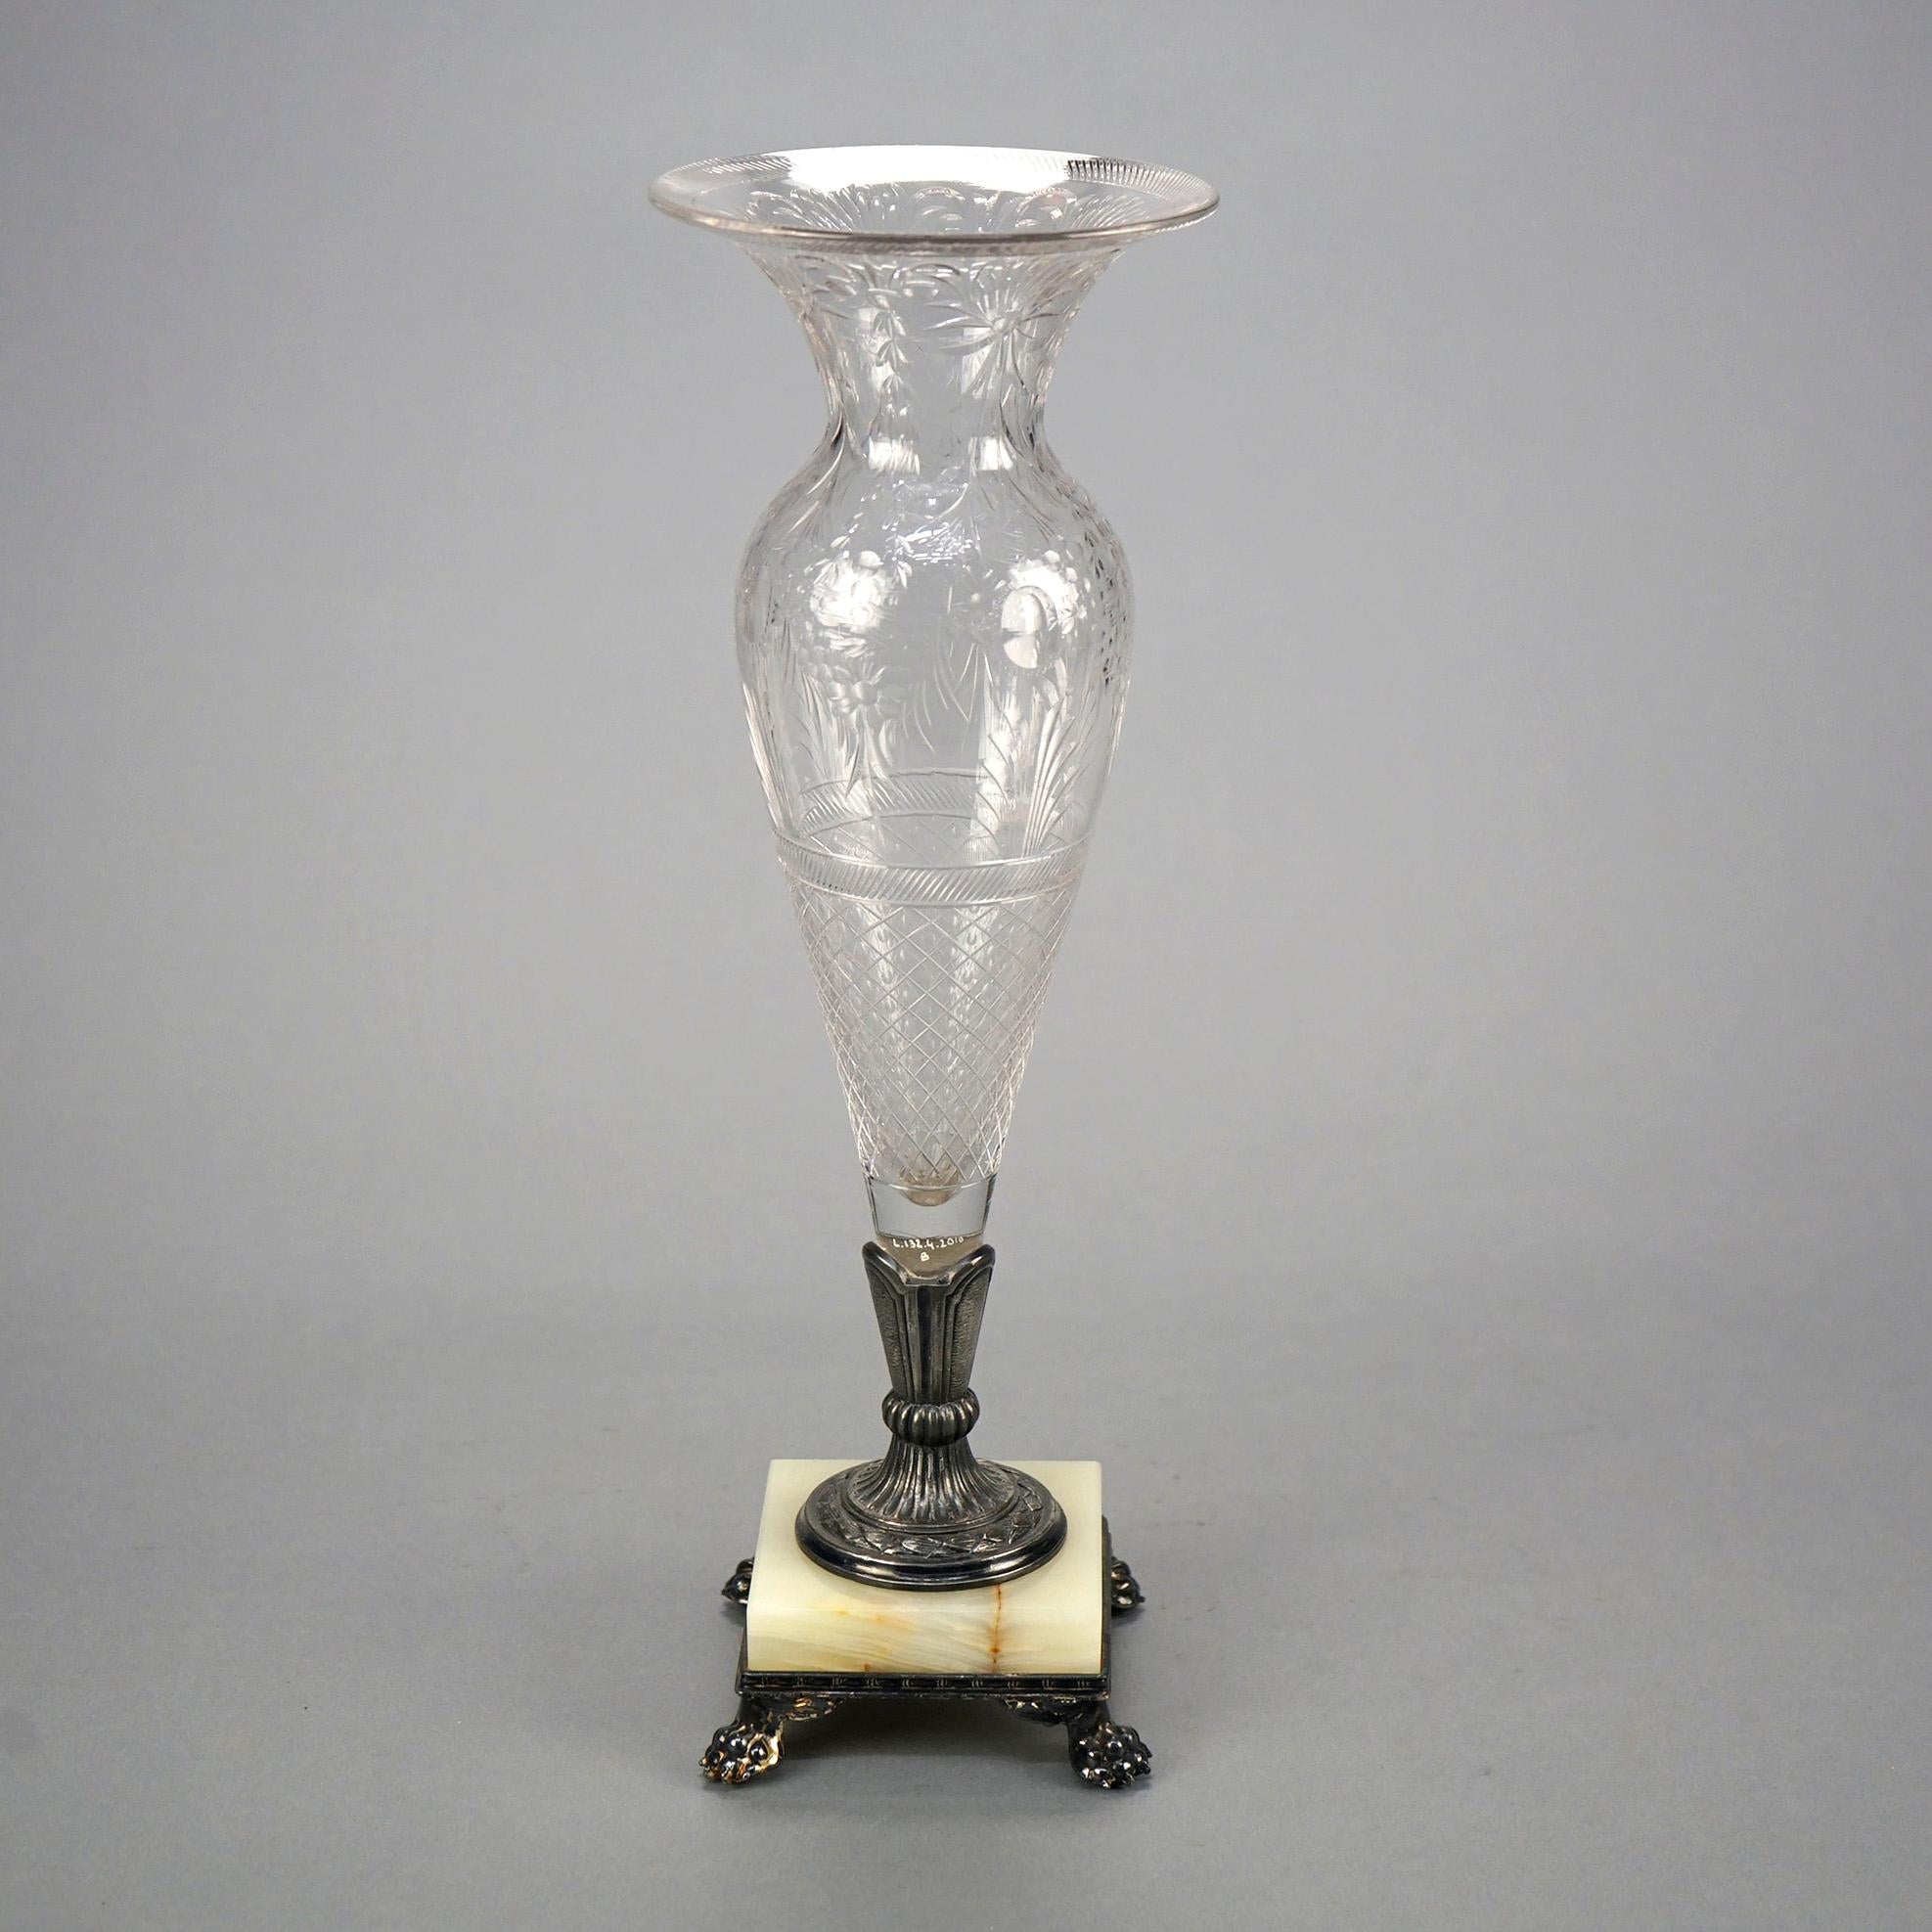 20th Century Pairpoint Cut Glass Clear Vases with Silver Plate & Onyx Bases, Signed, c1900